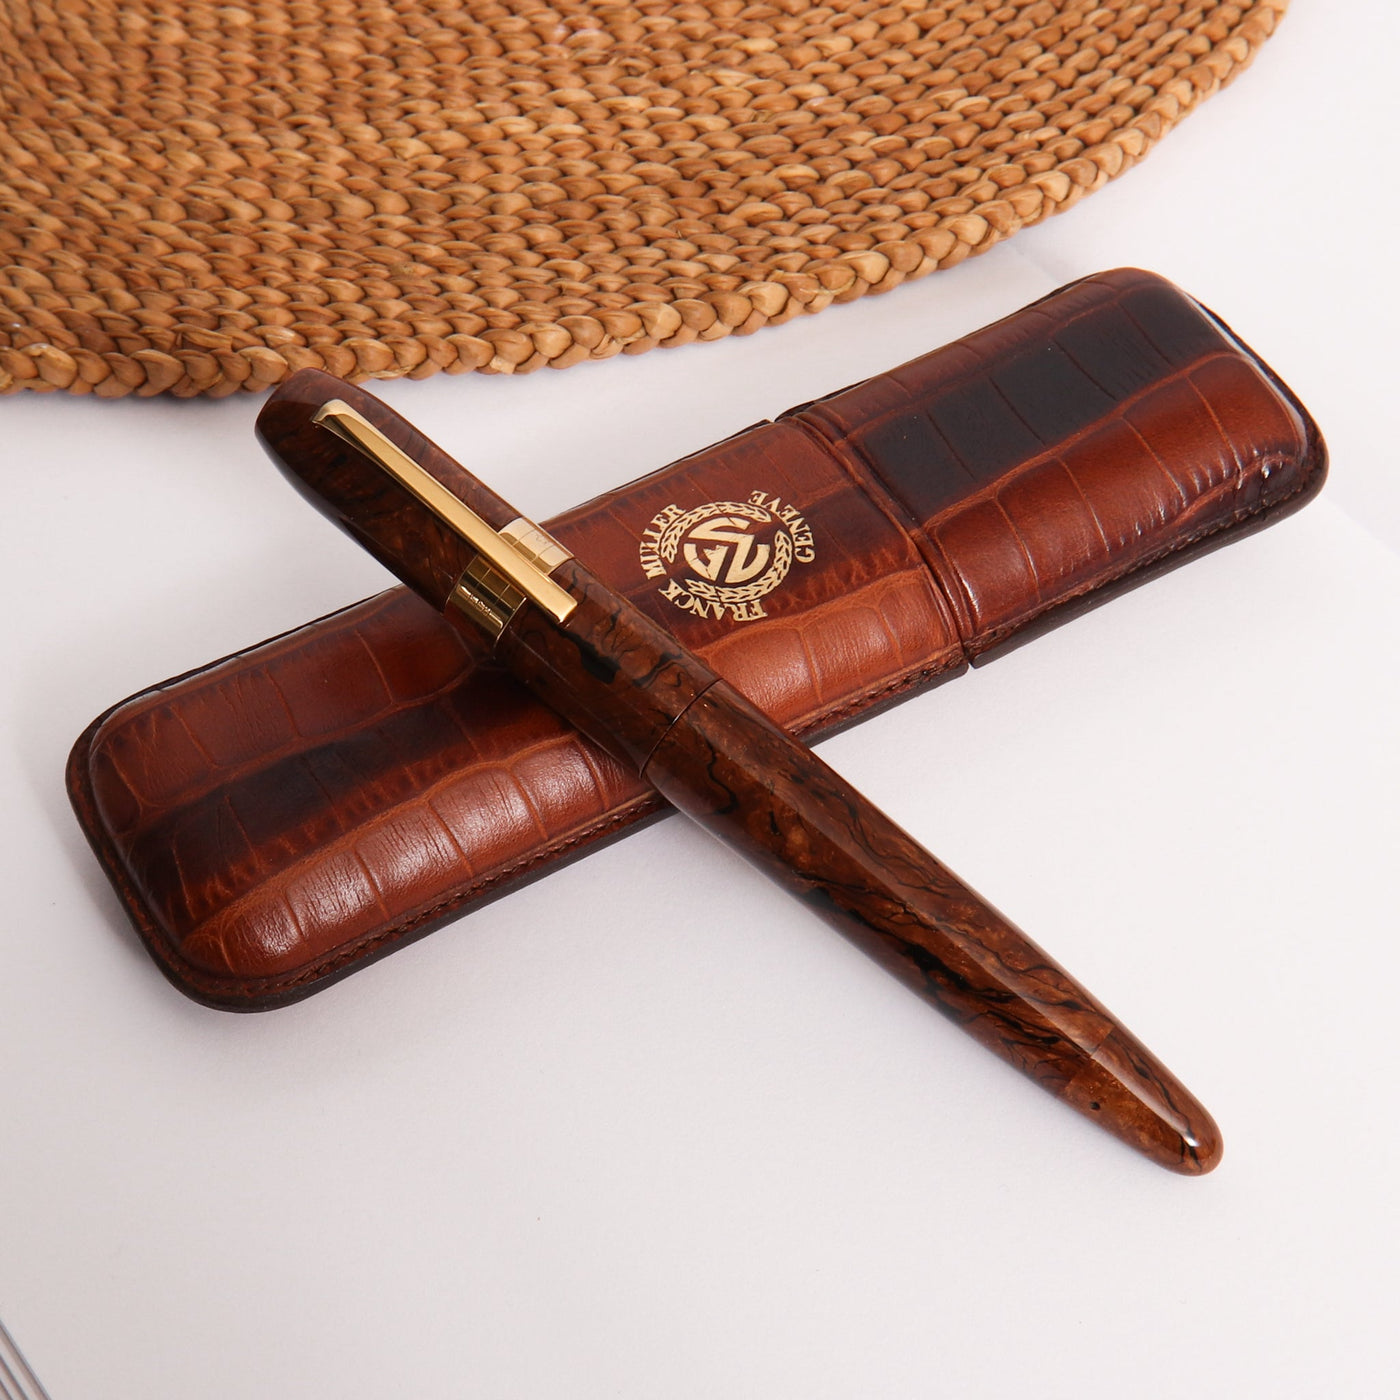 Franck-Muller-by-Omas-Cigar-Briarwood-Limited-Edition-Fountain-Pen-Capped